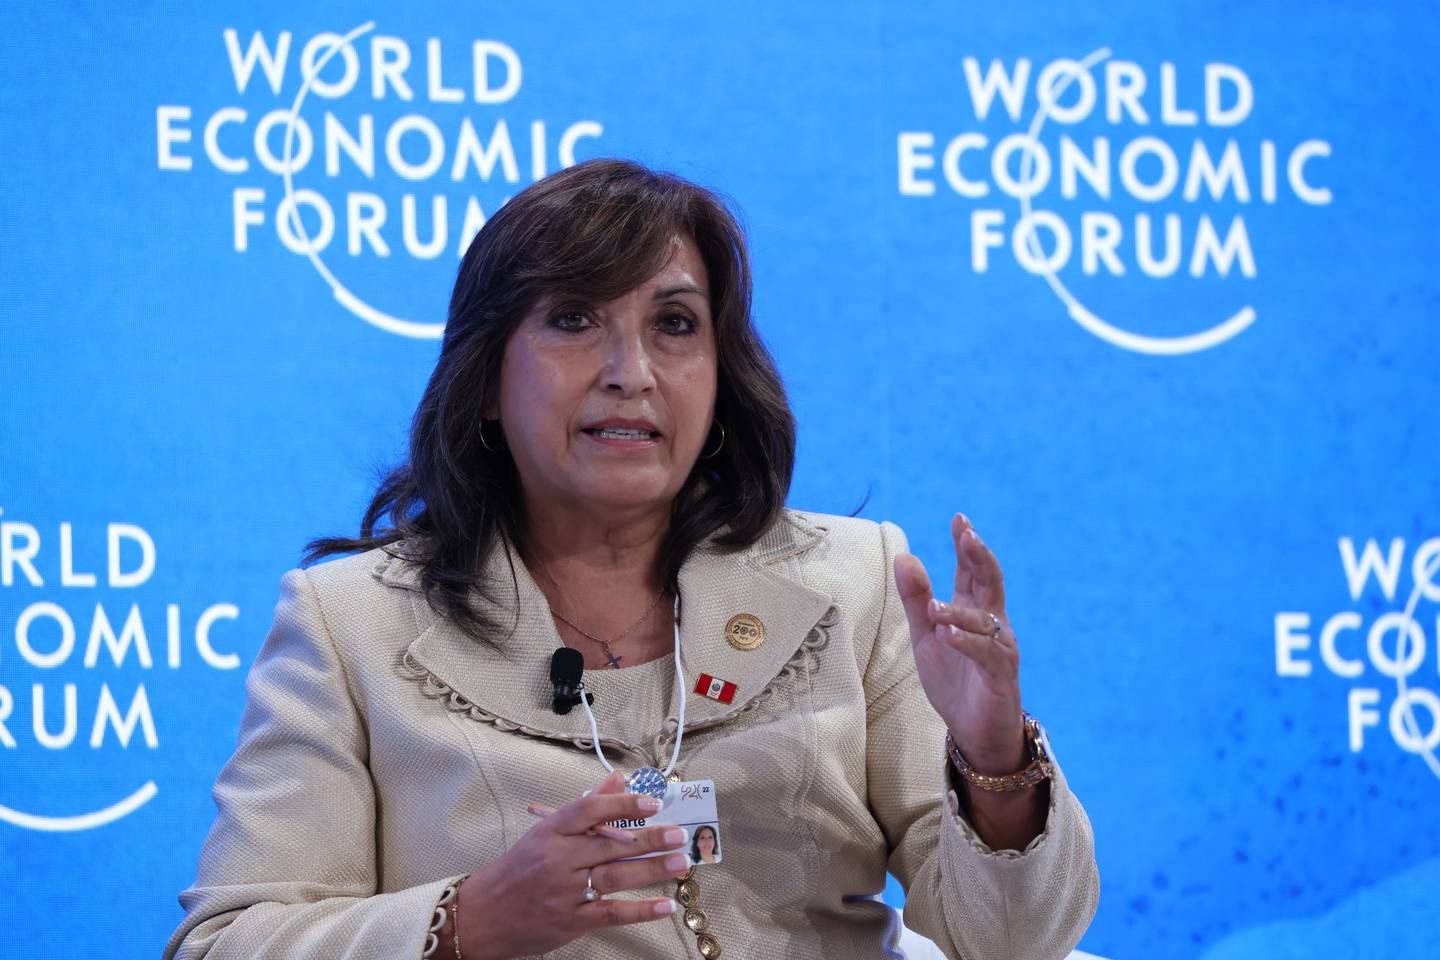 Dina Boluarte, Peru's vice president, during a panel session on day two of the World Economic Forum (WEF) in Davos, Switzerland, on Tuesday, May 24, 2022. The annual Davos gathering of political leaders, top executives and celebrities runs from May 22 to 26. Photographer: Hollie Adams/Bloomberg